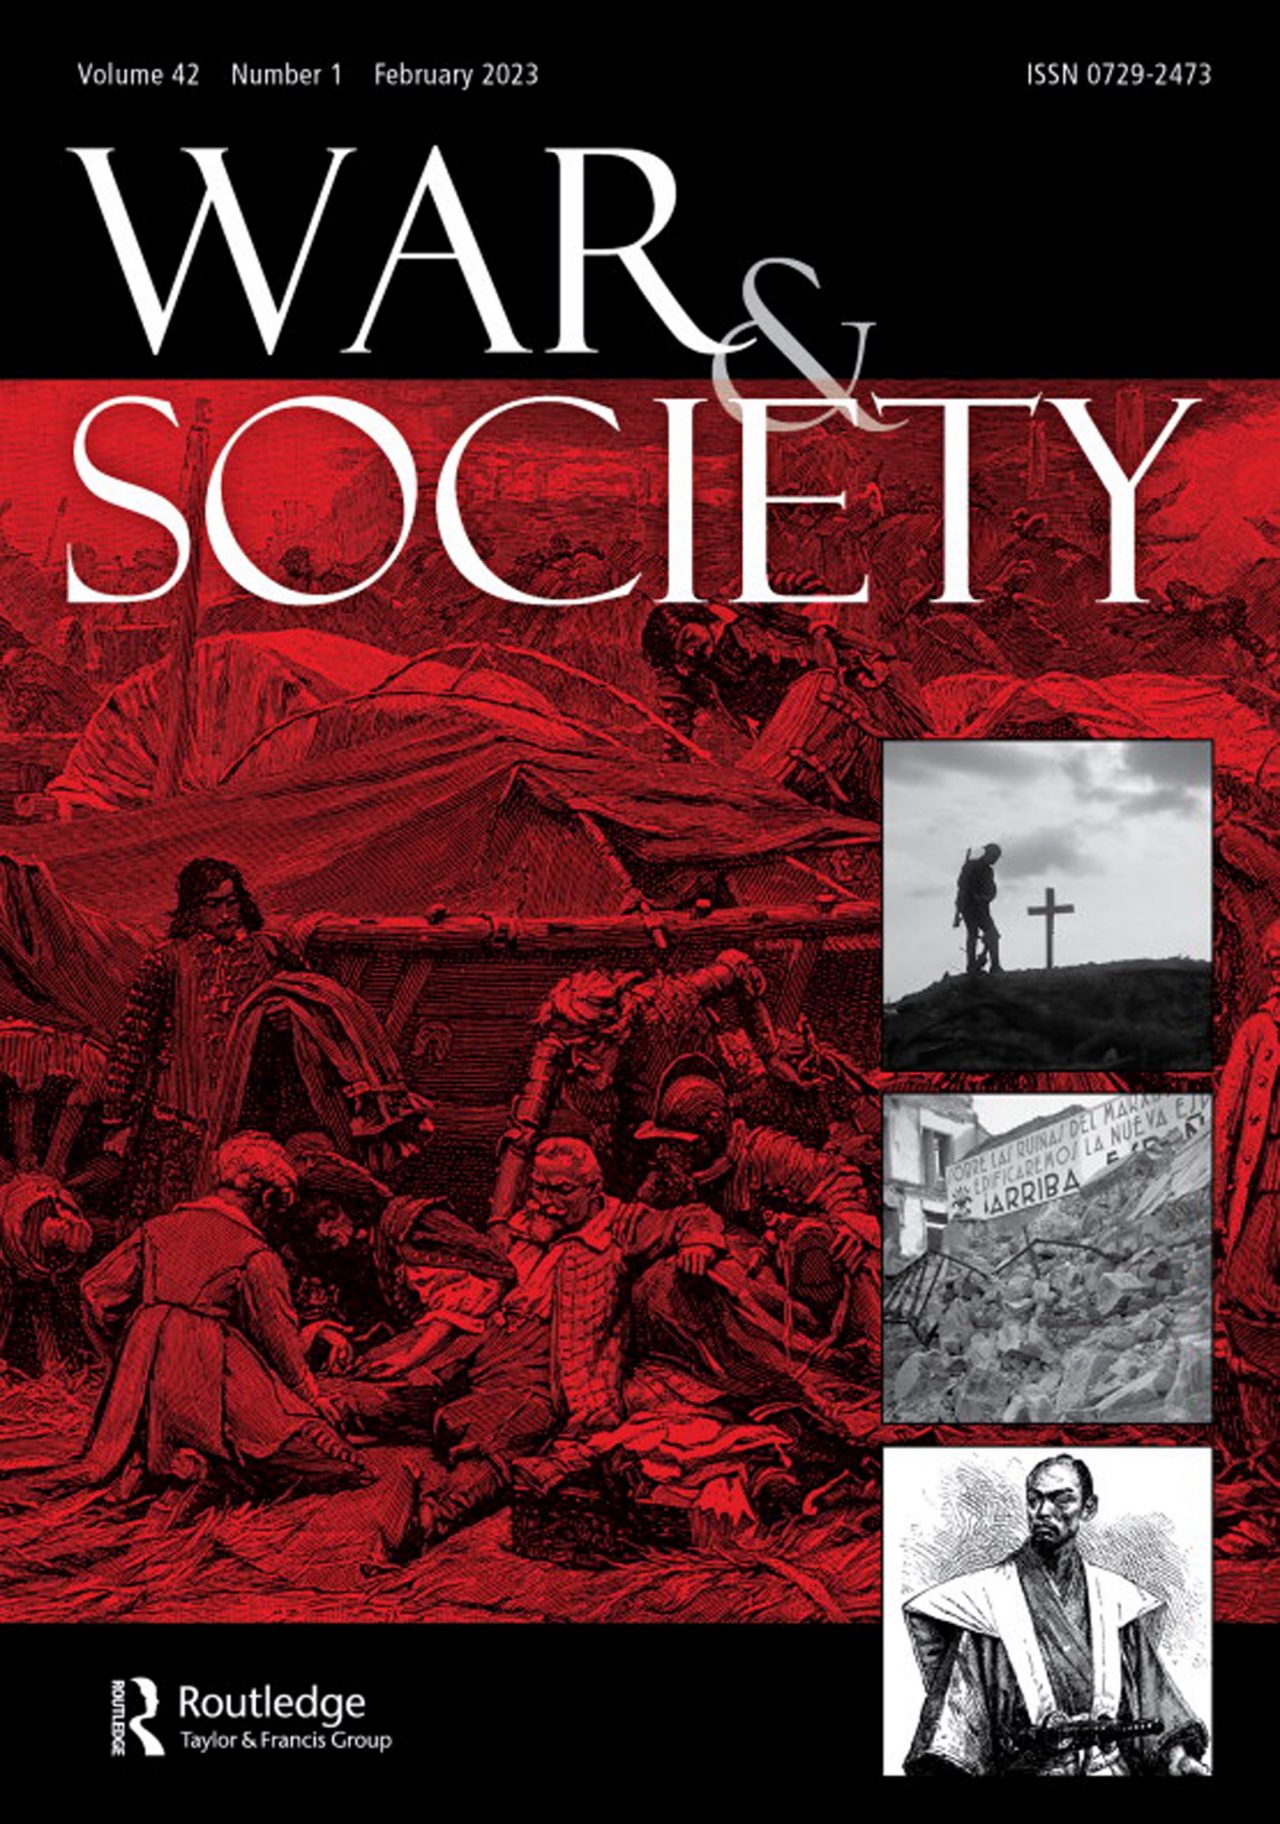 War and society journal cover